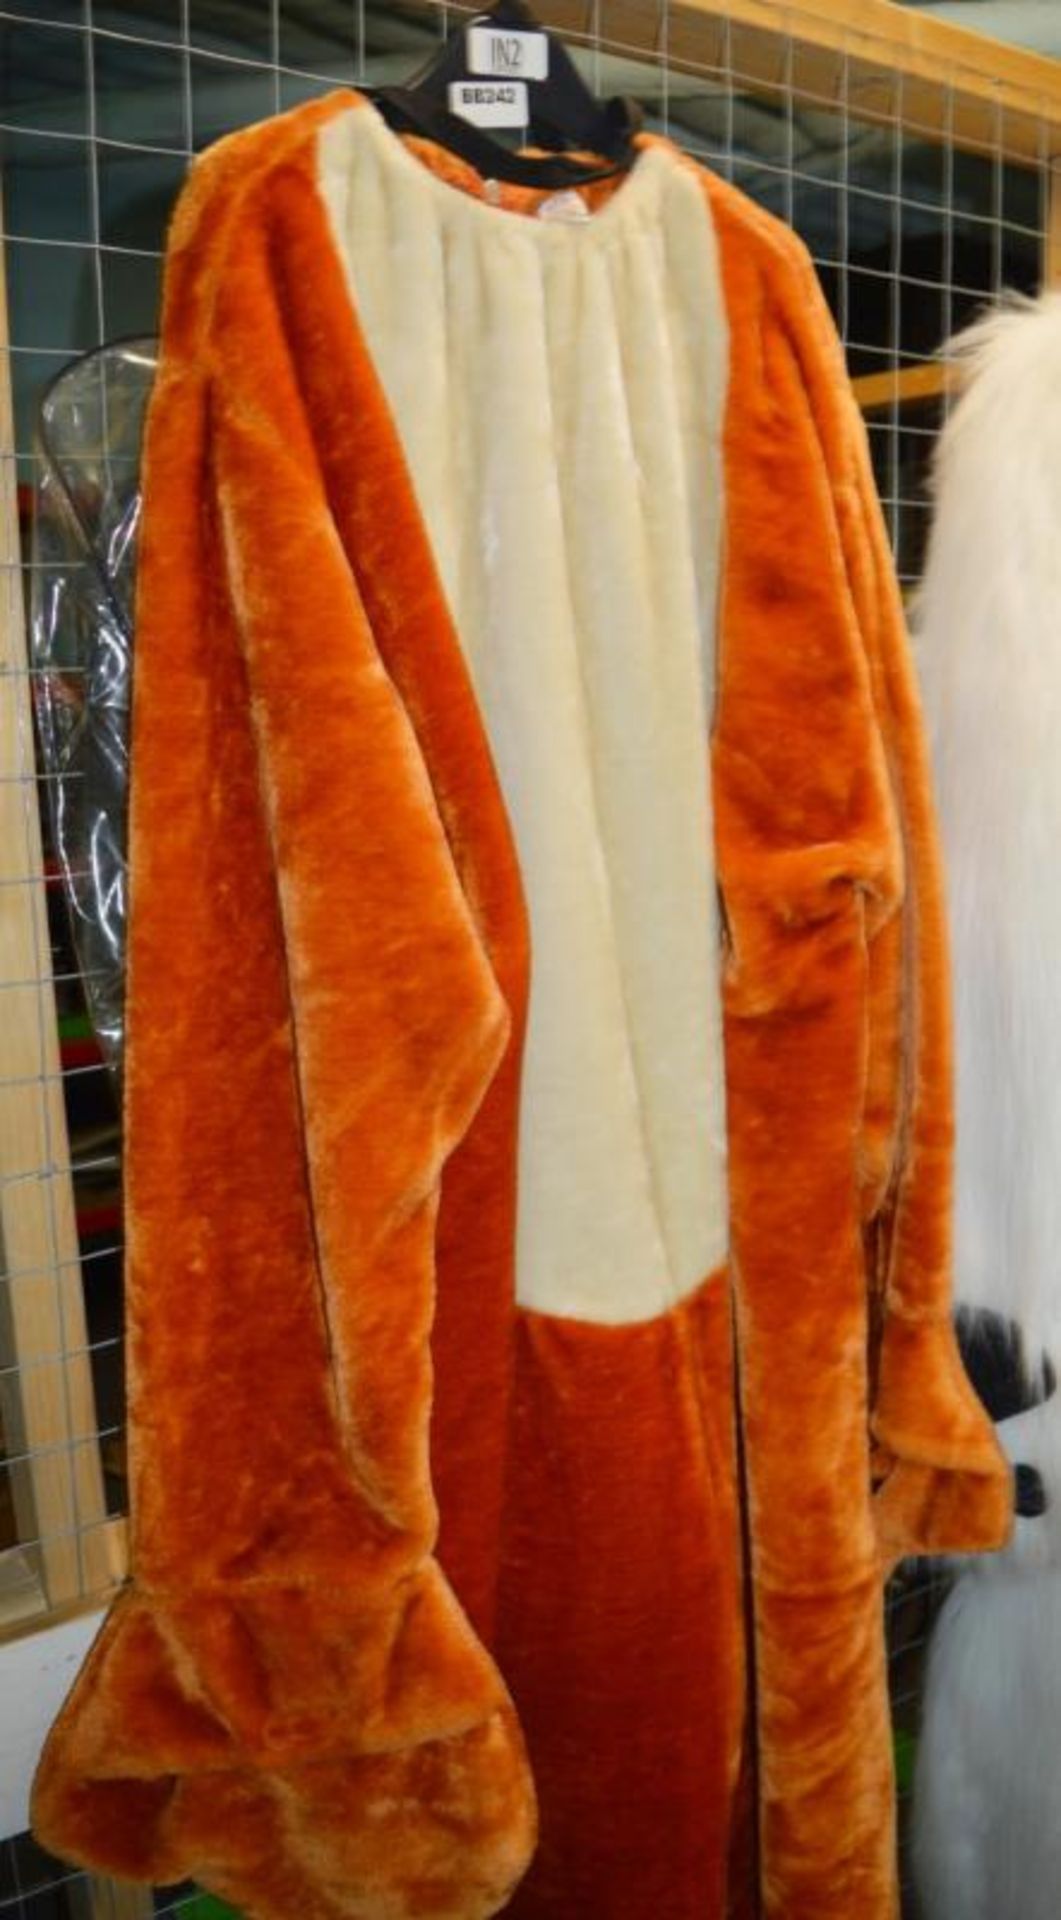 1 x Adult Size Fancy Dress / Mascot REINDEER Costume - Includes Suit, Feet and Head - Very Good Cond - Image 2 of 3